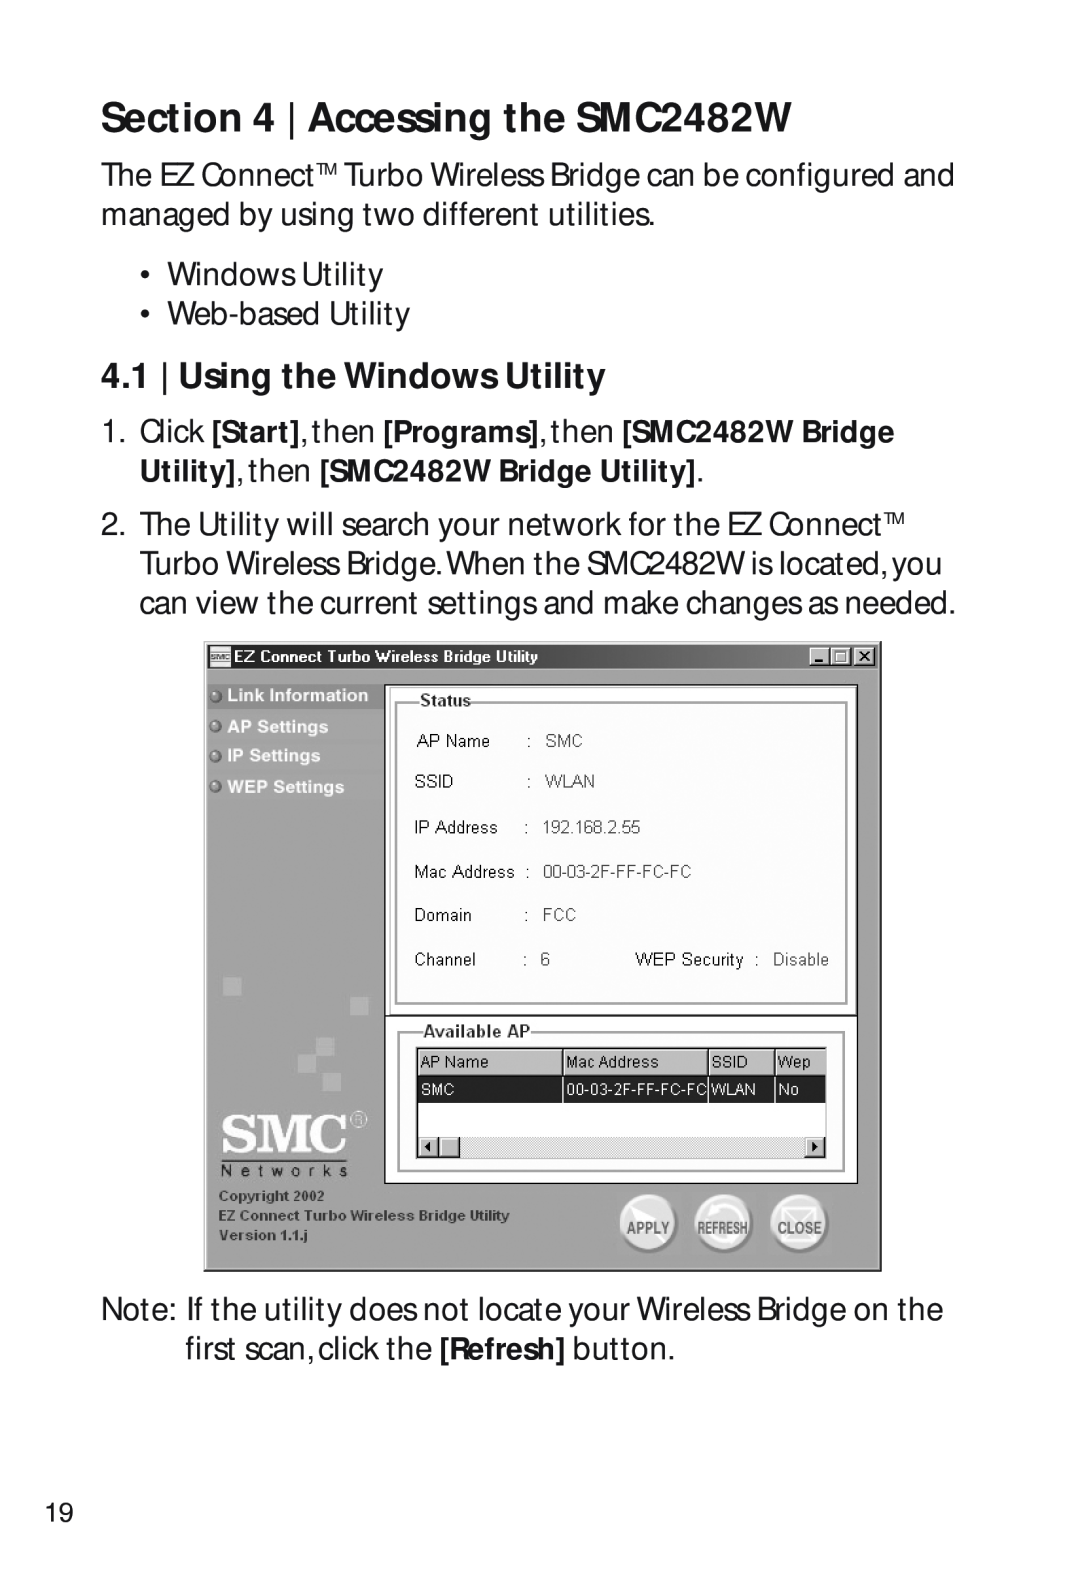 SMC Networks manual Accessing the SMC2482W, Using the Windows Utility 